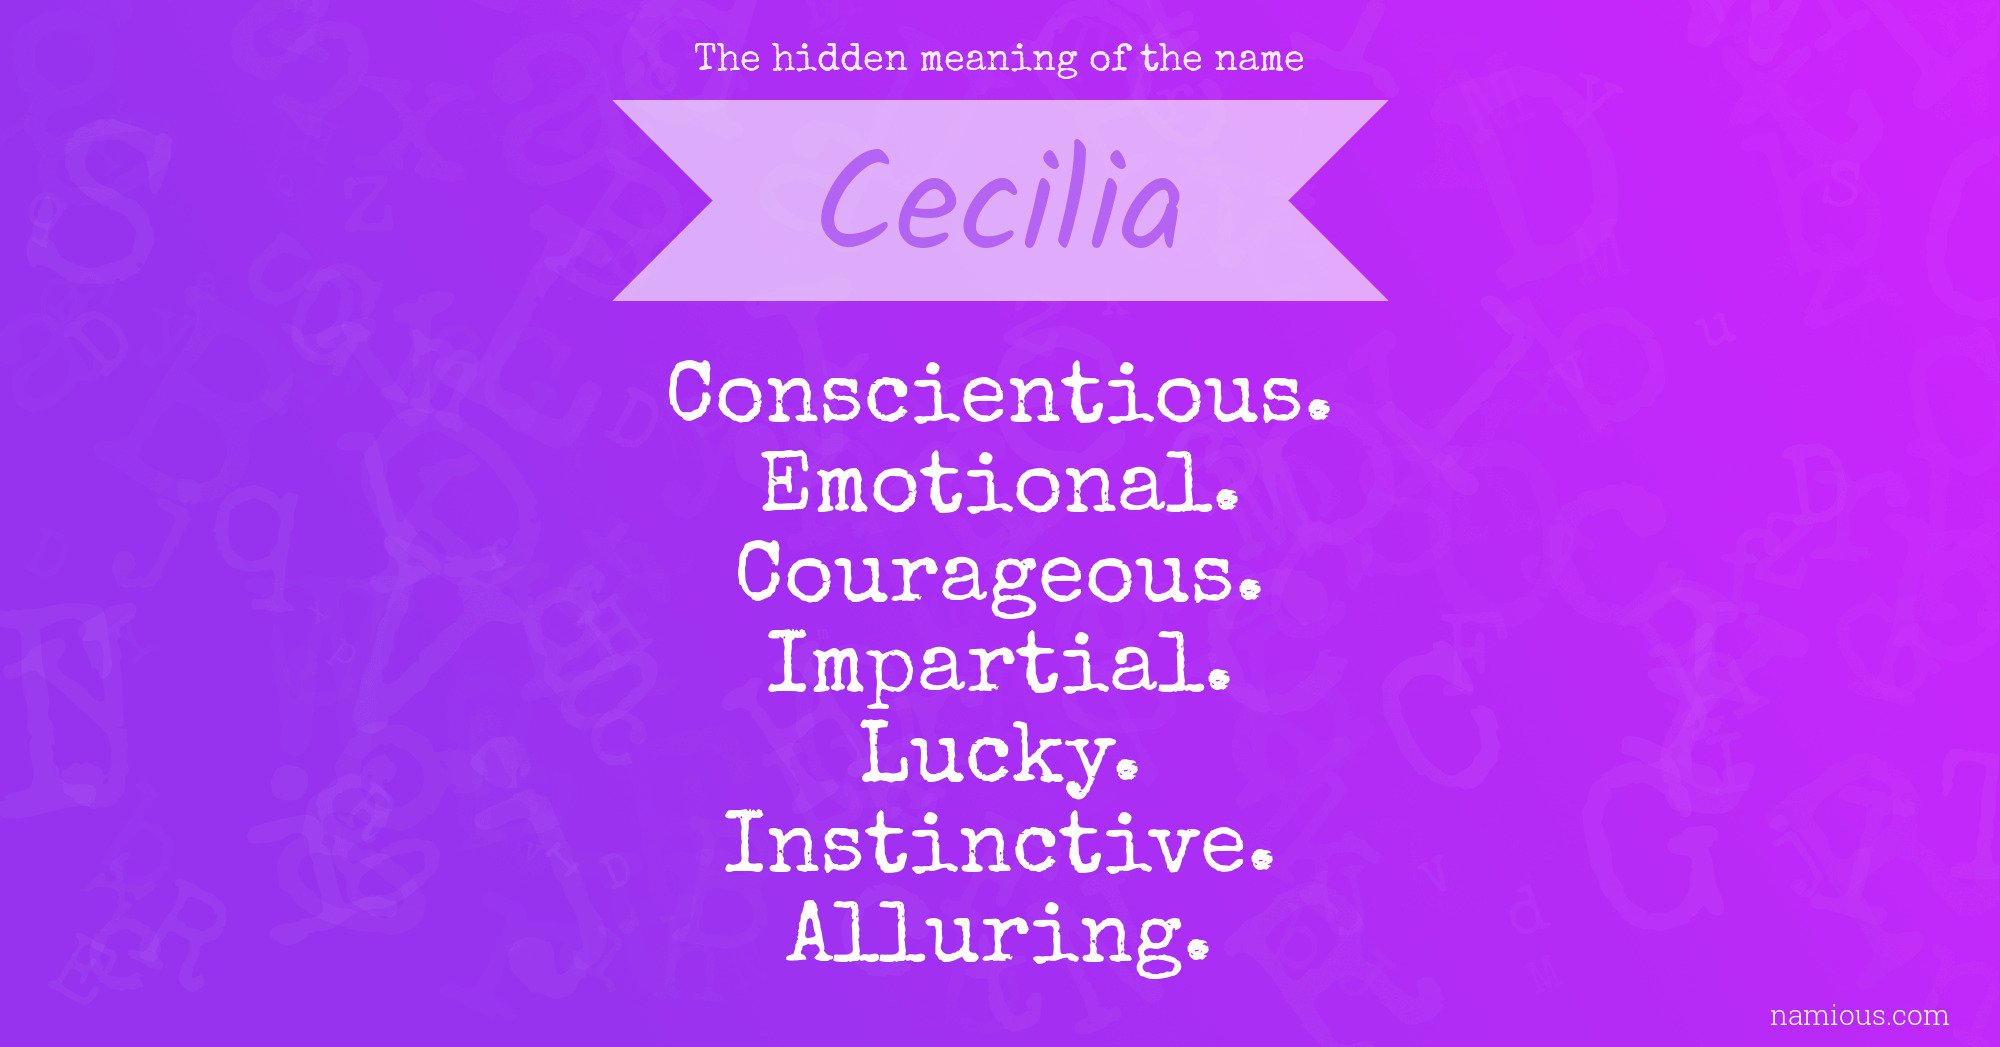 The hidden meaning of the name Cecilia